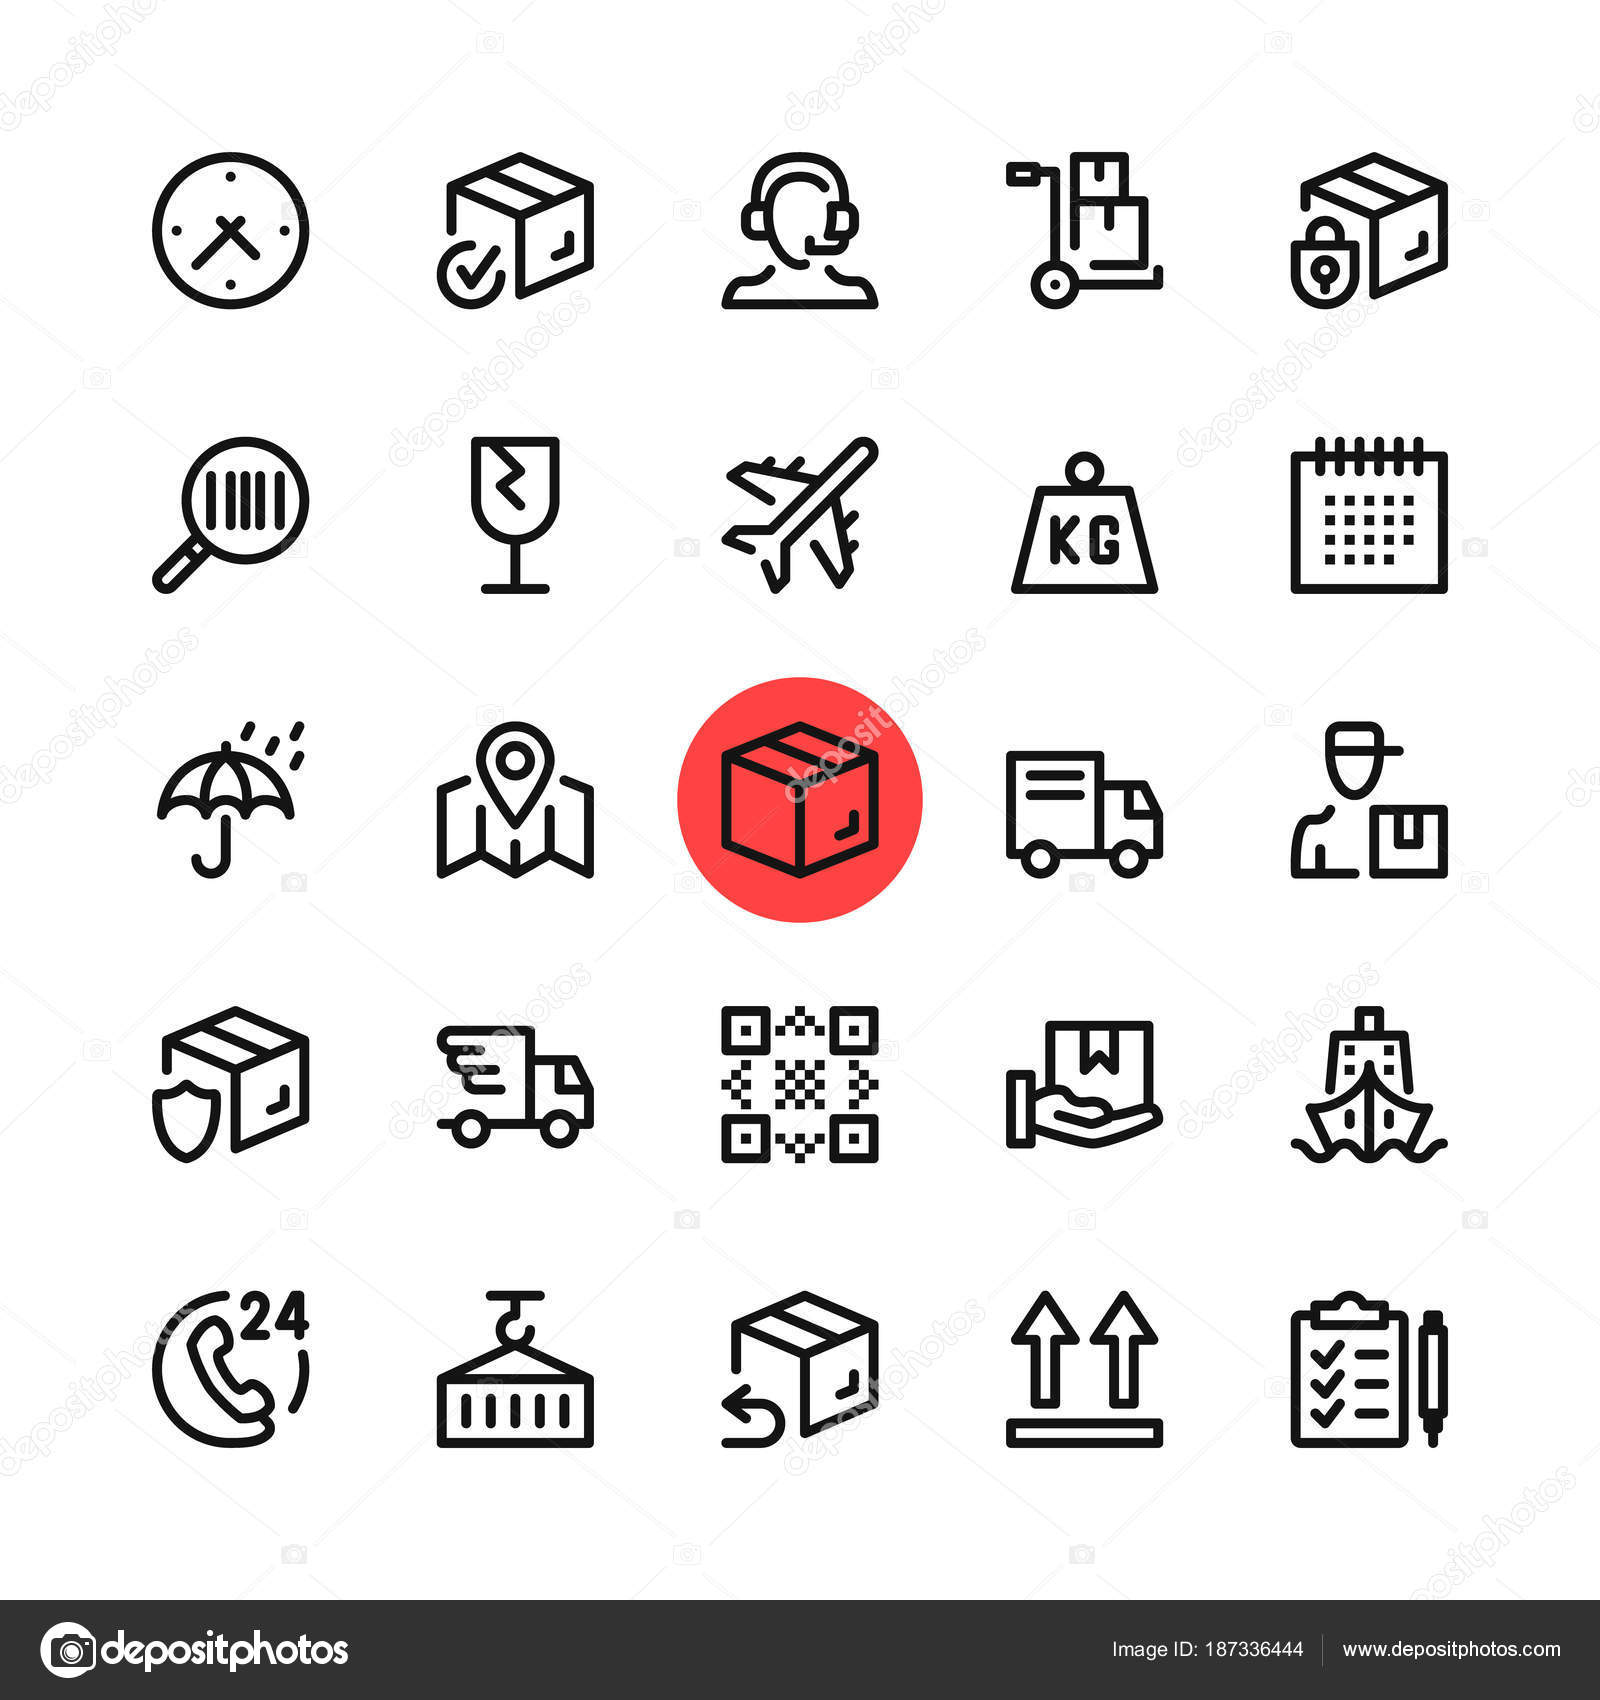 Set of Delivery shipping icon logo vector illustration. logistics